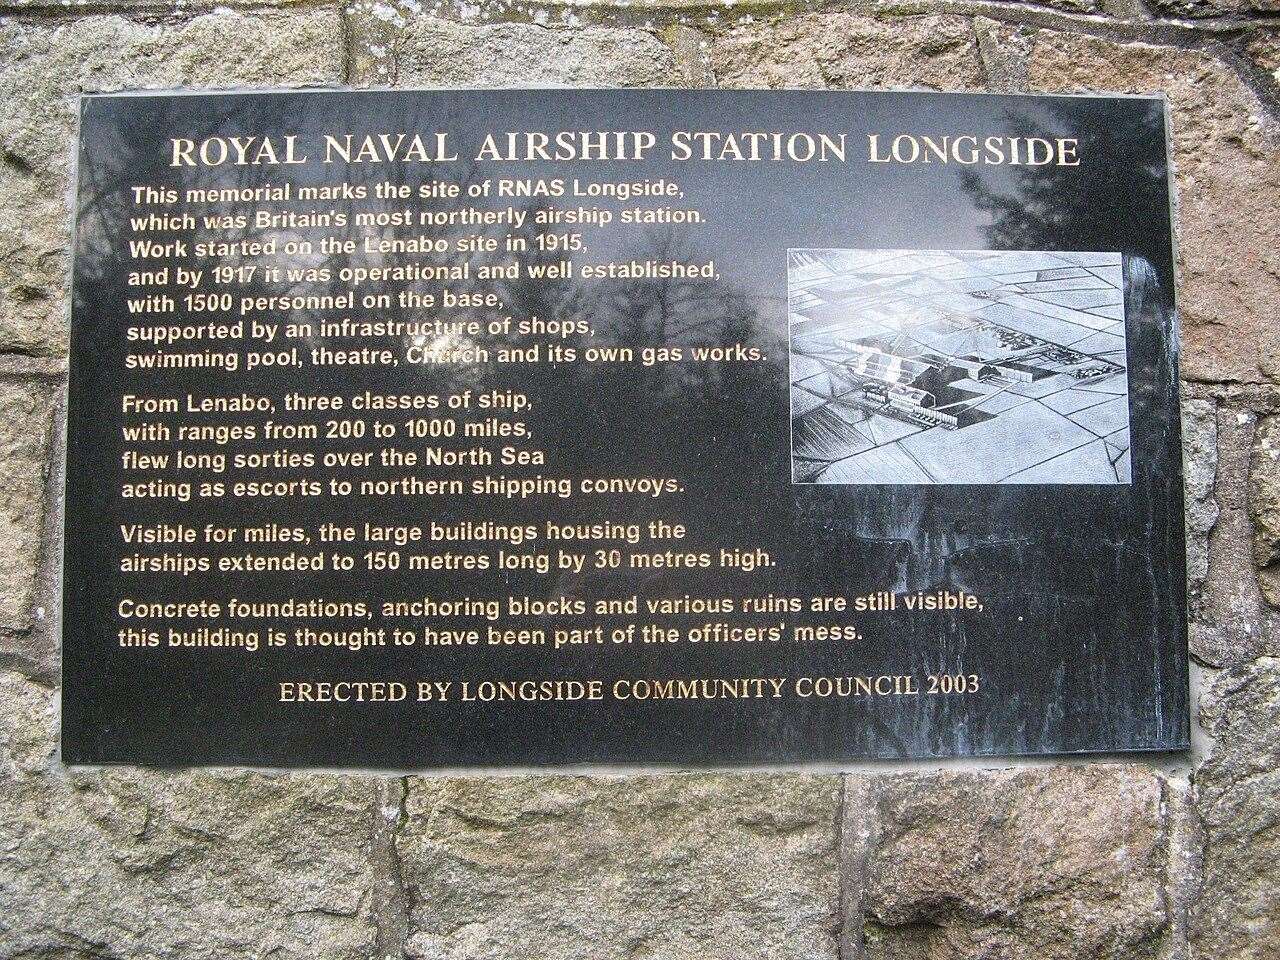 A plaque marks the location of the airship base.